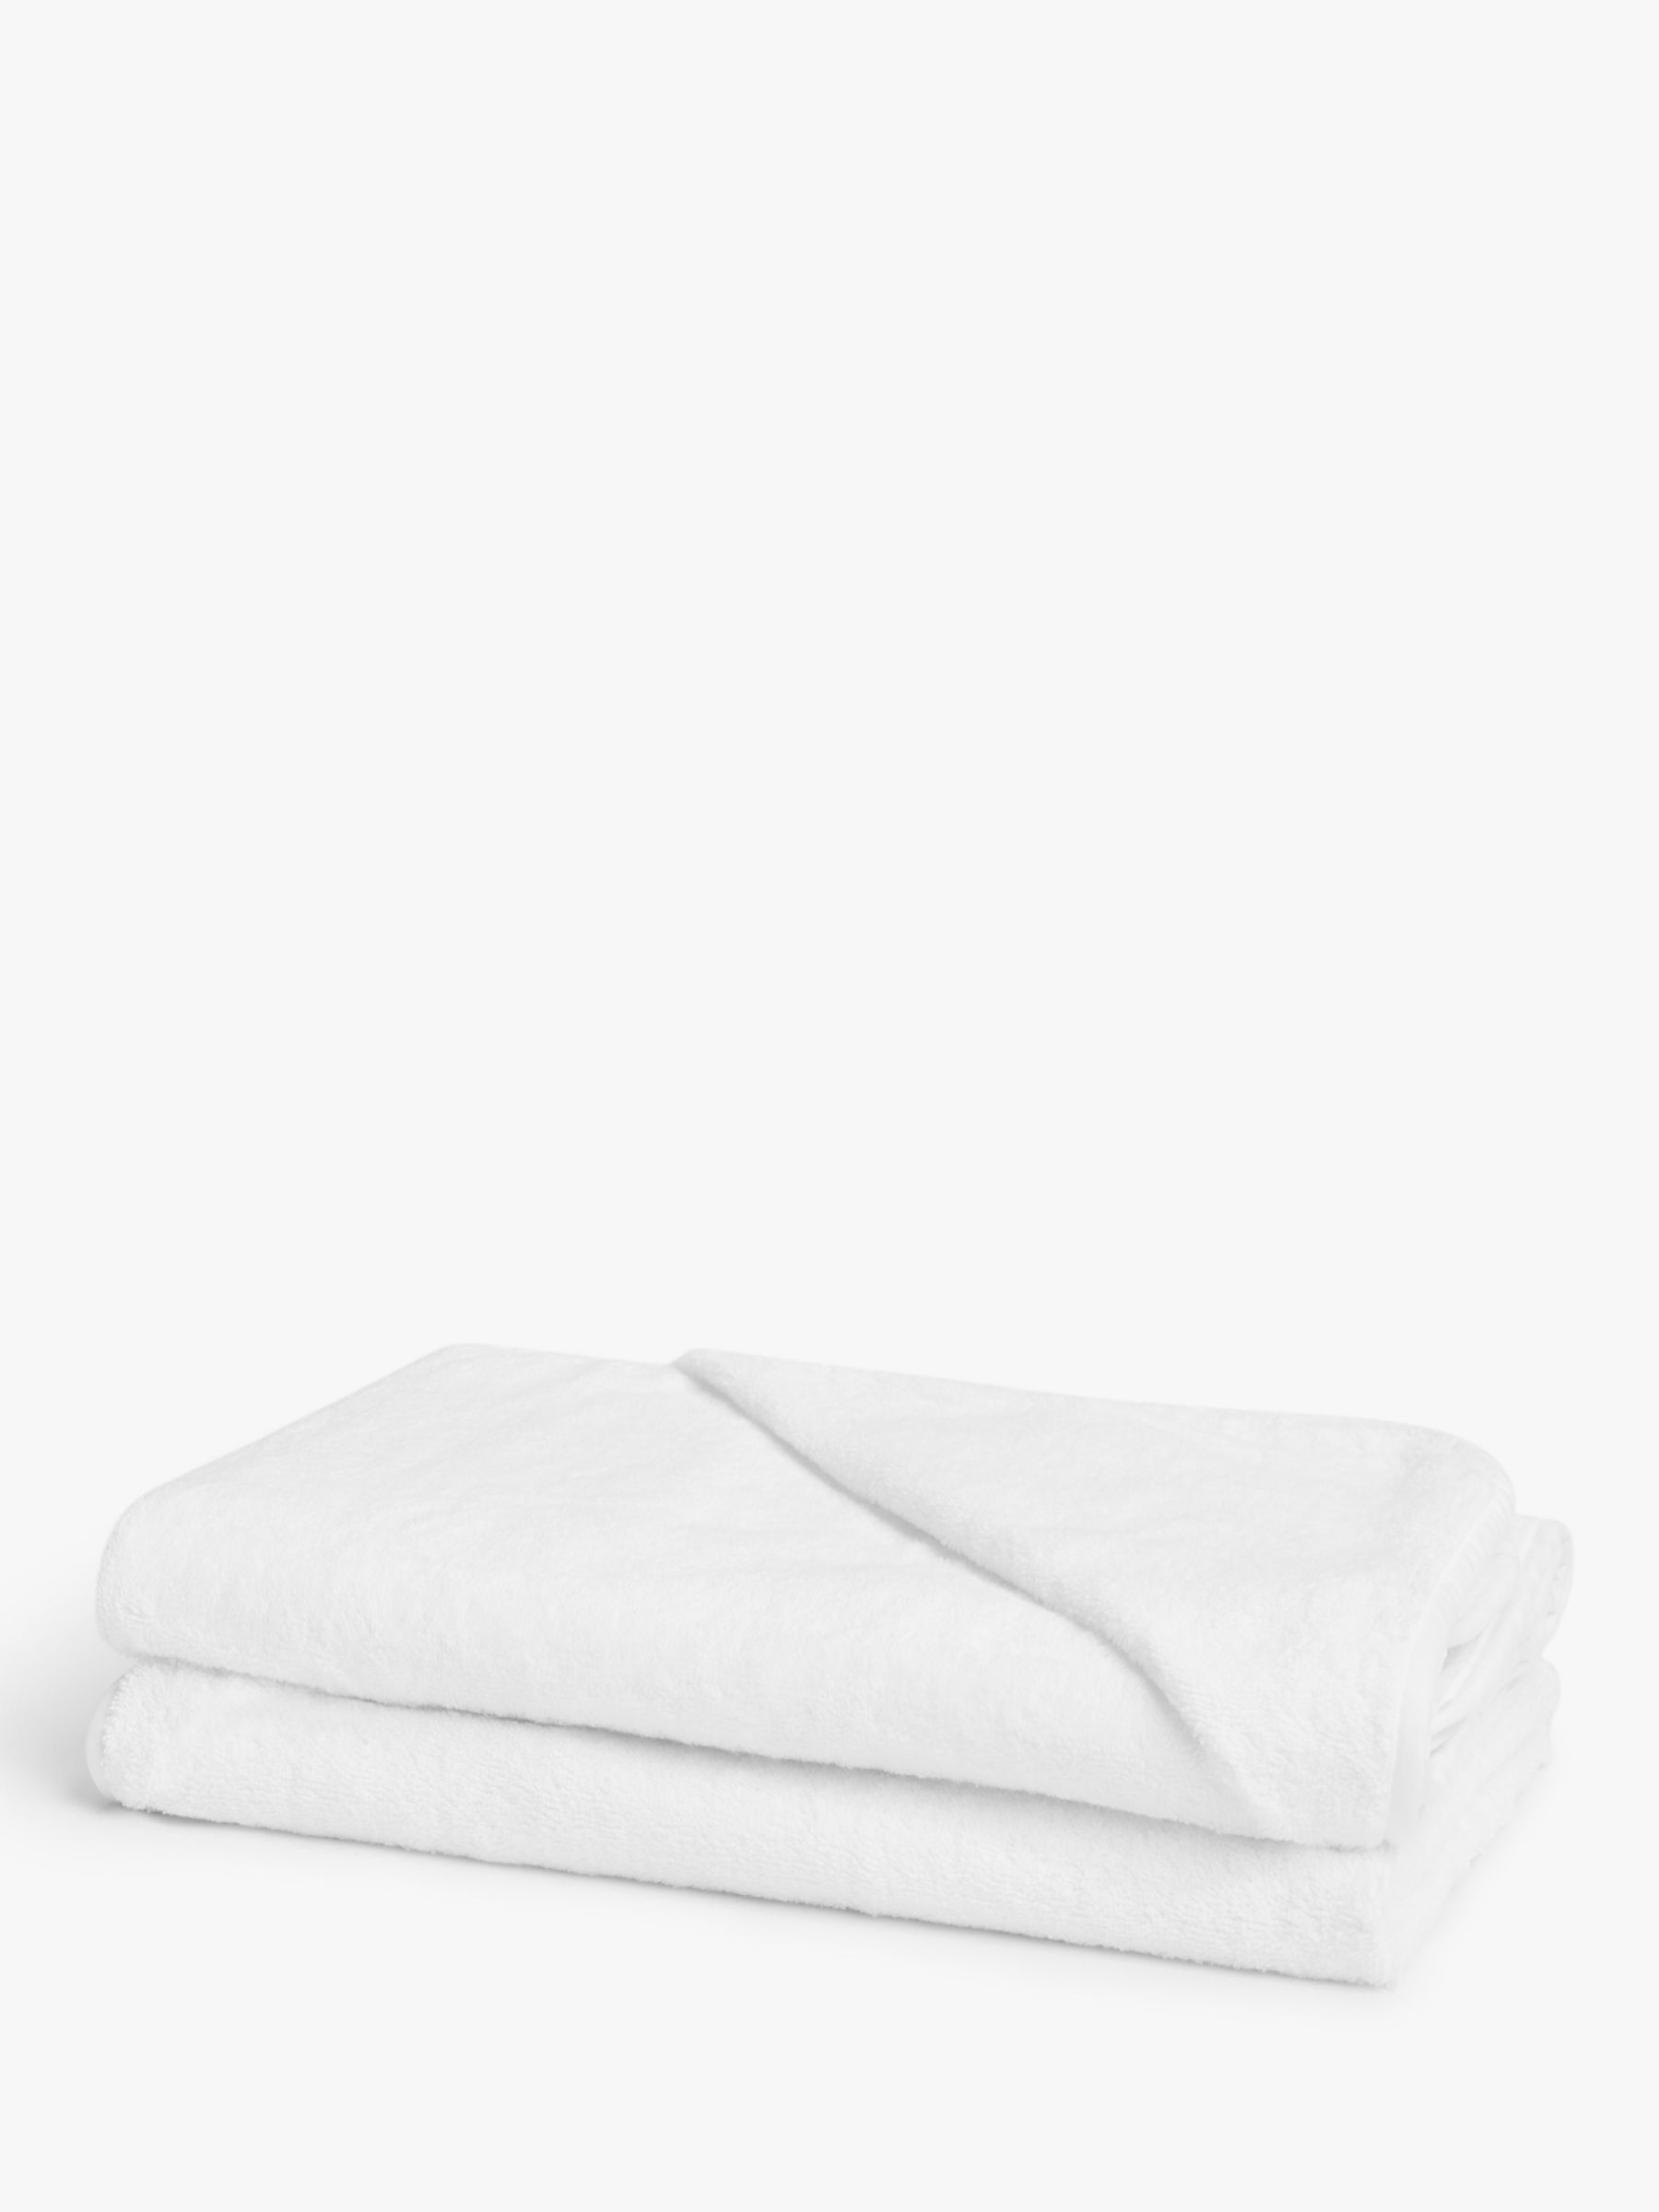 John Lewis ANYDAY Hooded Towels, Pack of 2, White